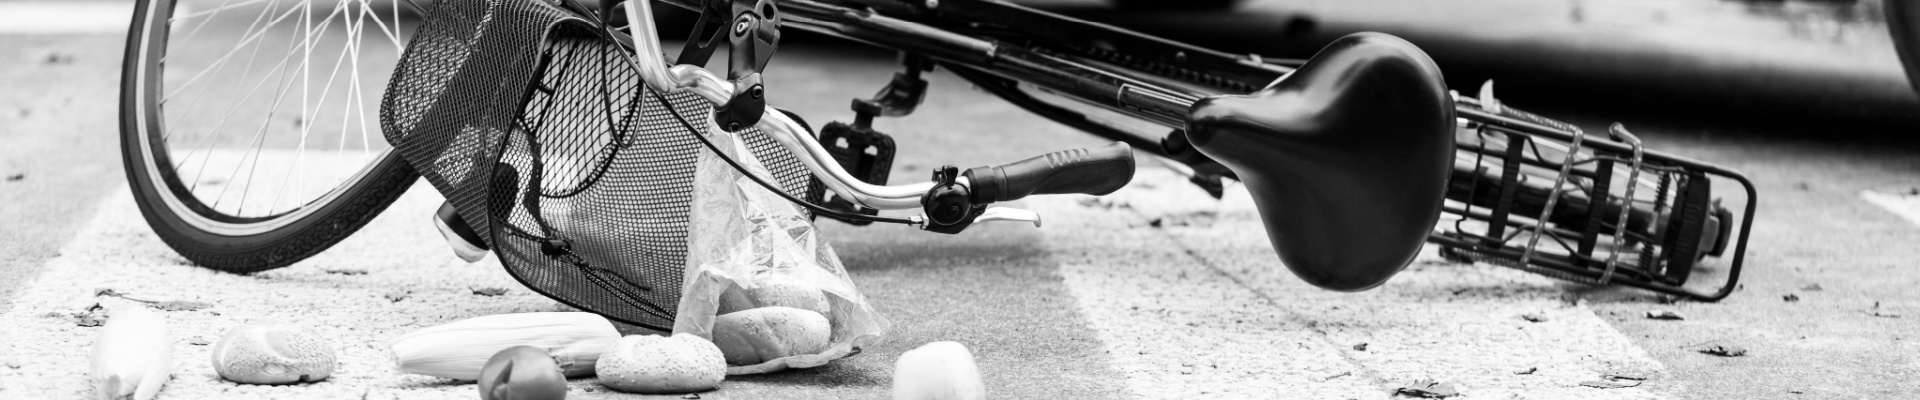 Yuba City Bicycle Accident Attorney